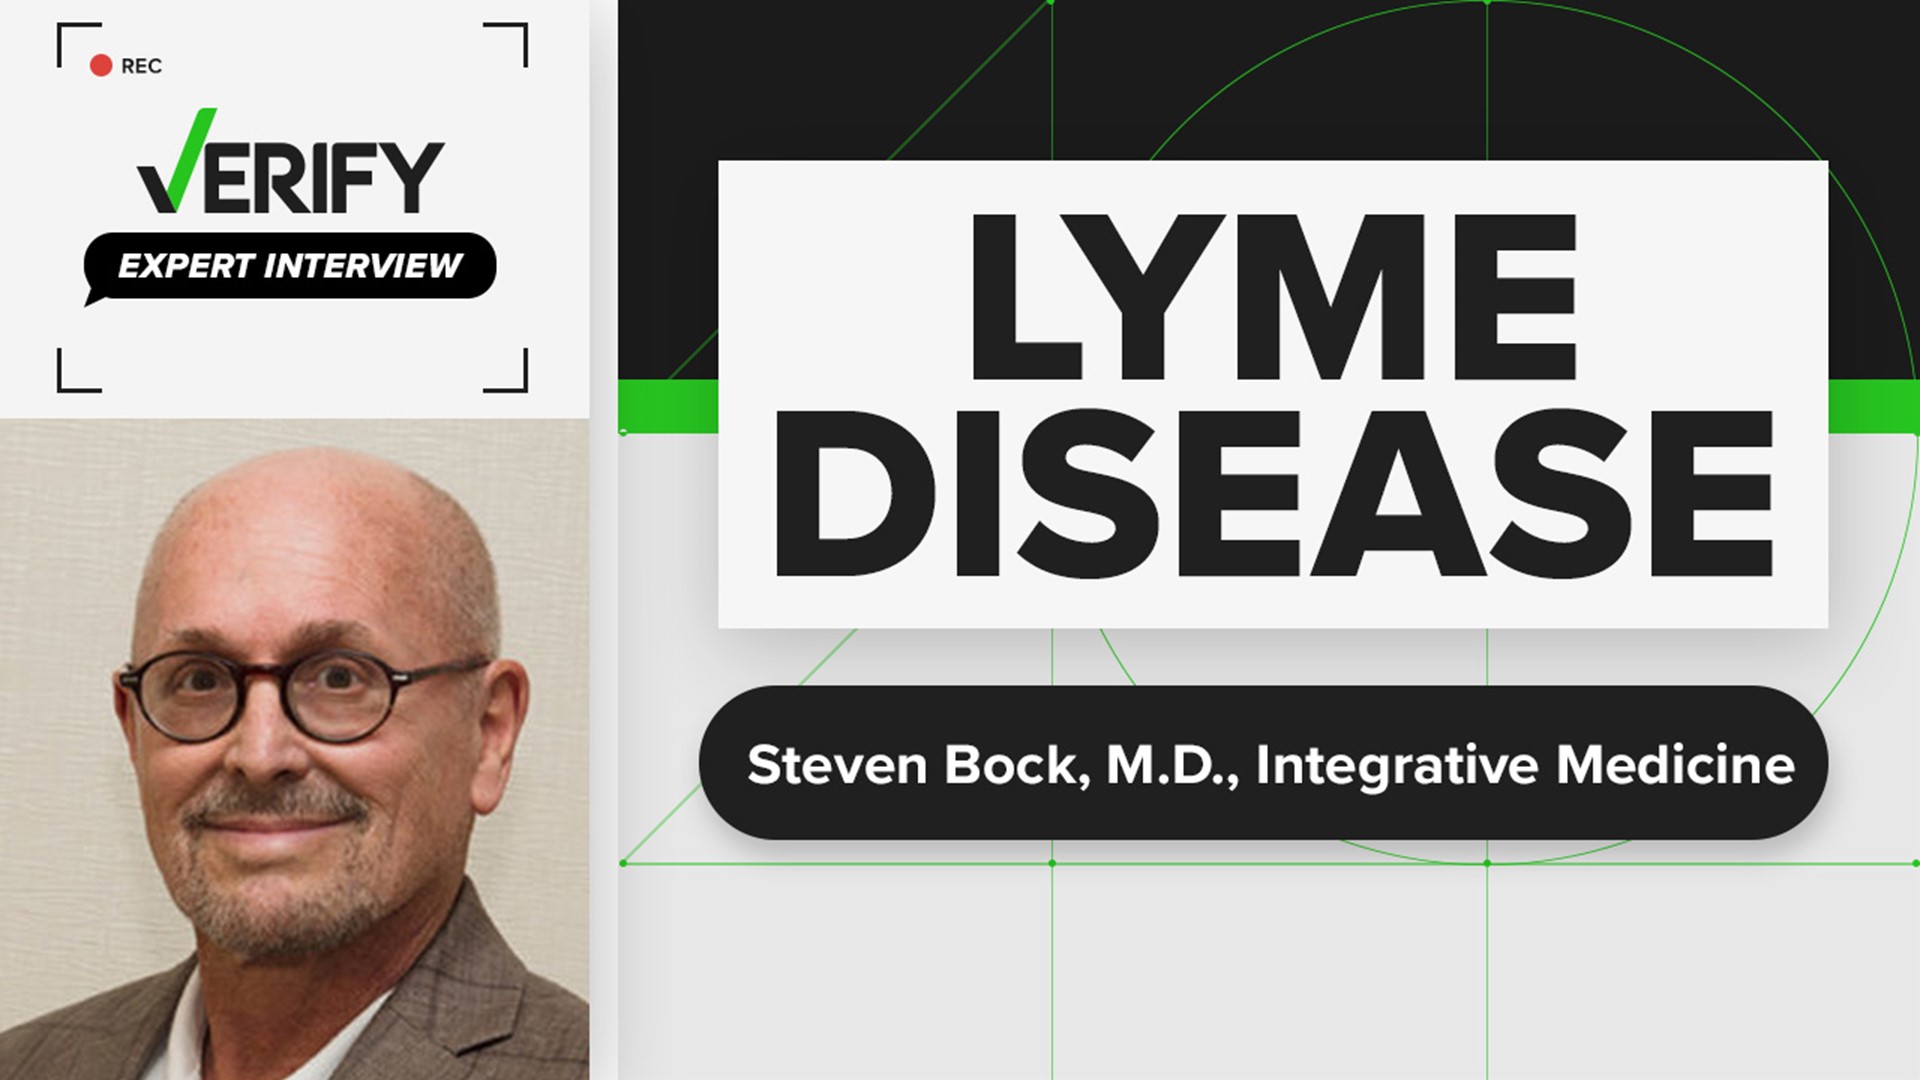 Dr Steven Bock, a specialist in Integrative medicine, spoke with the VERIFY team about a wide range of topics on Lyme disease. Including if it's gender specific, any